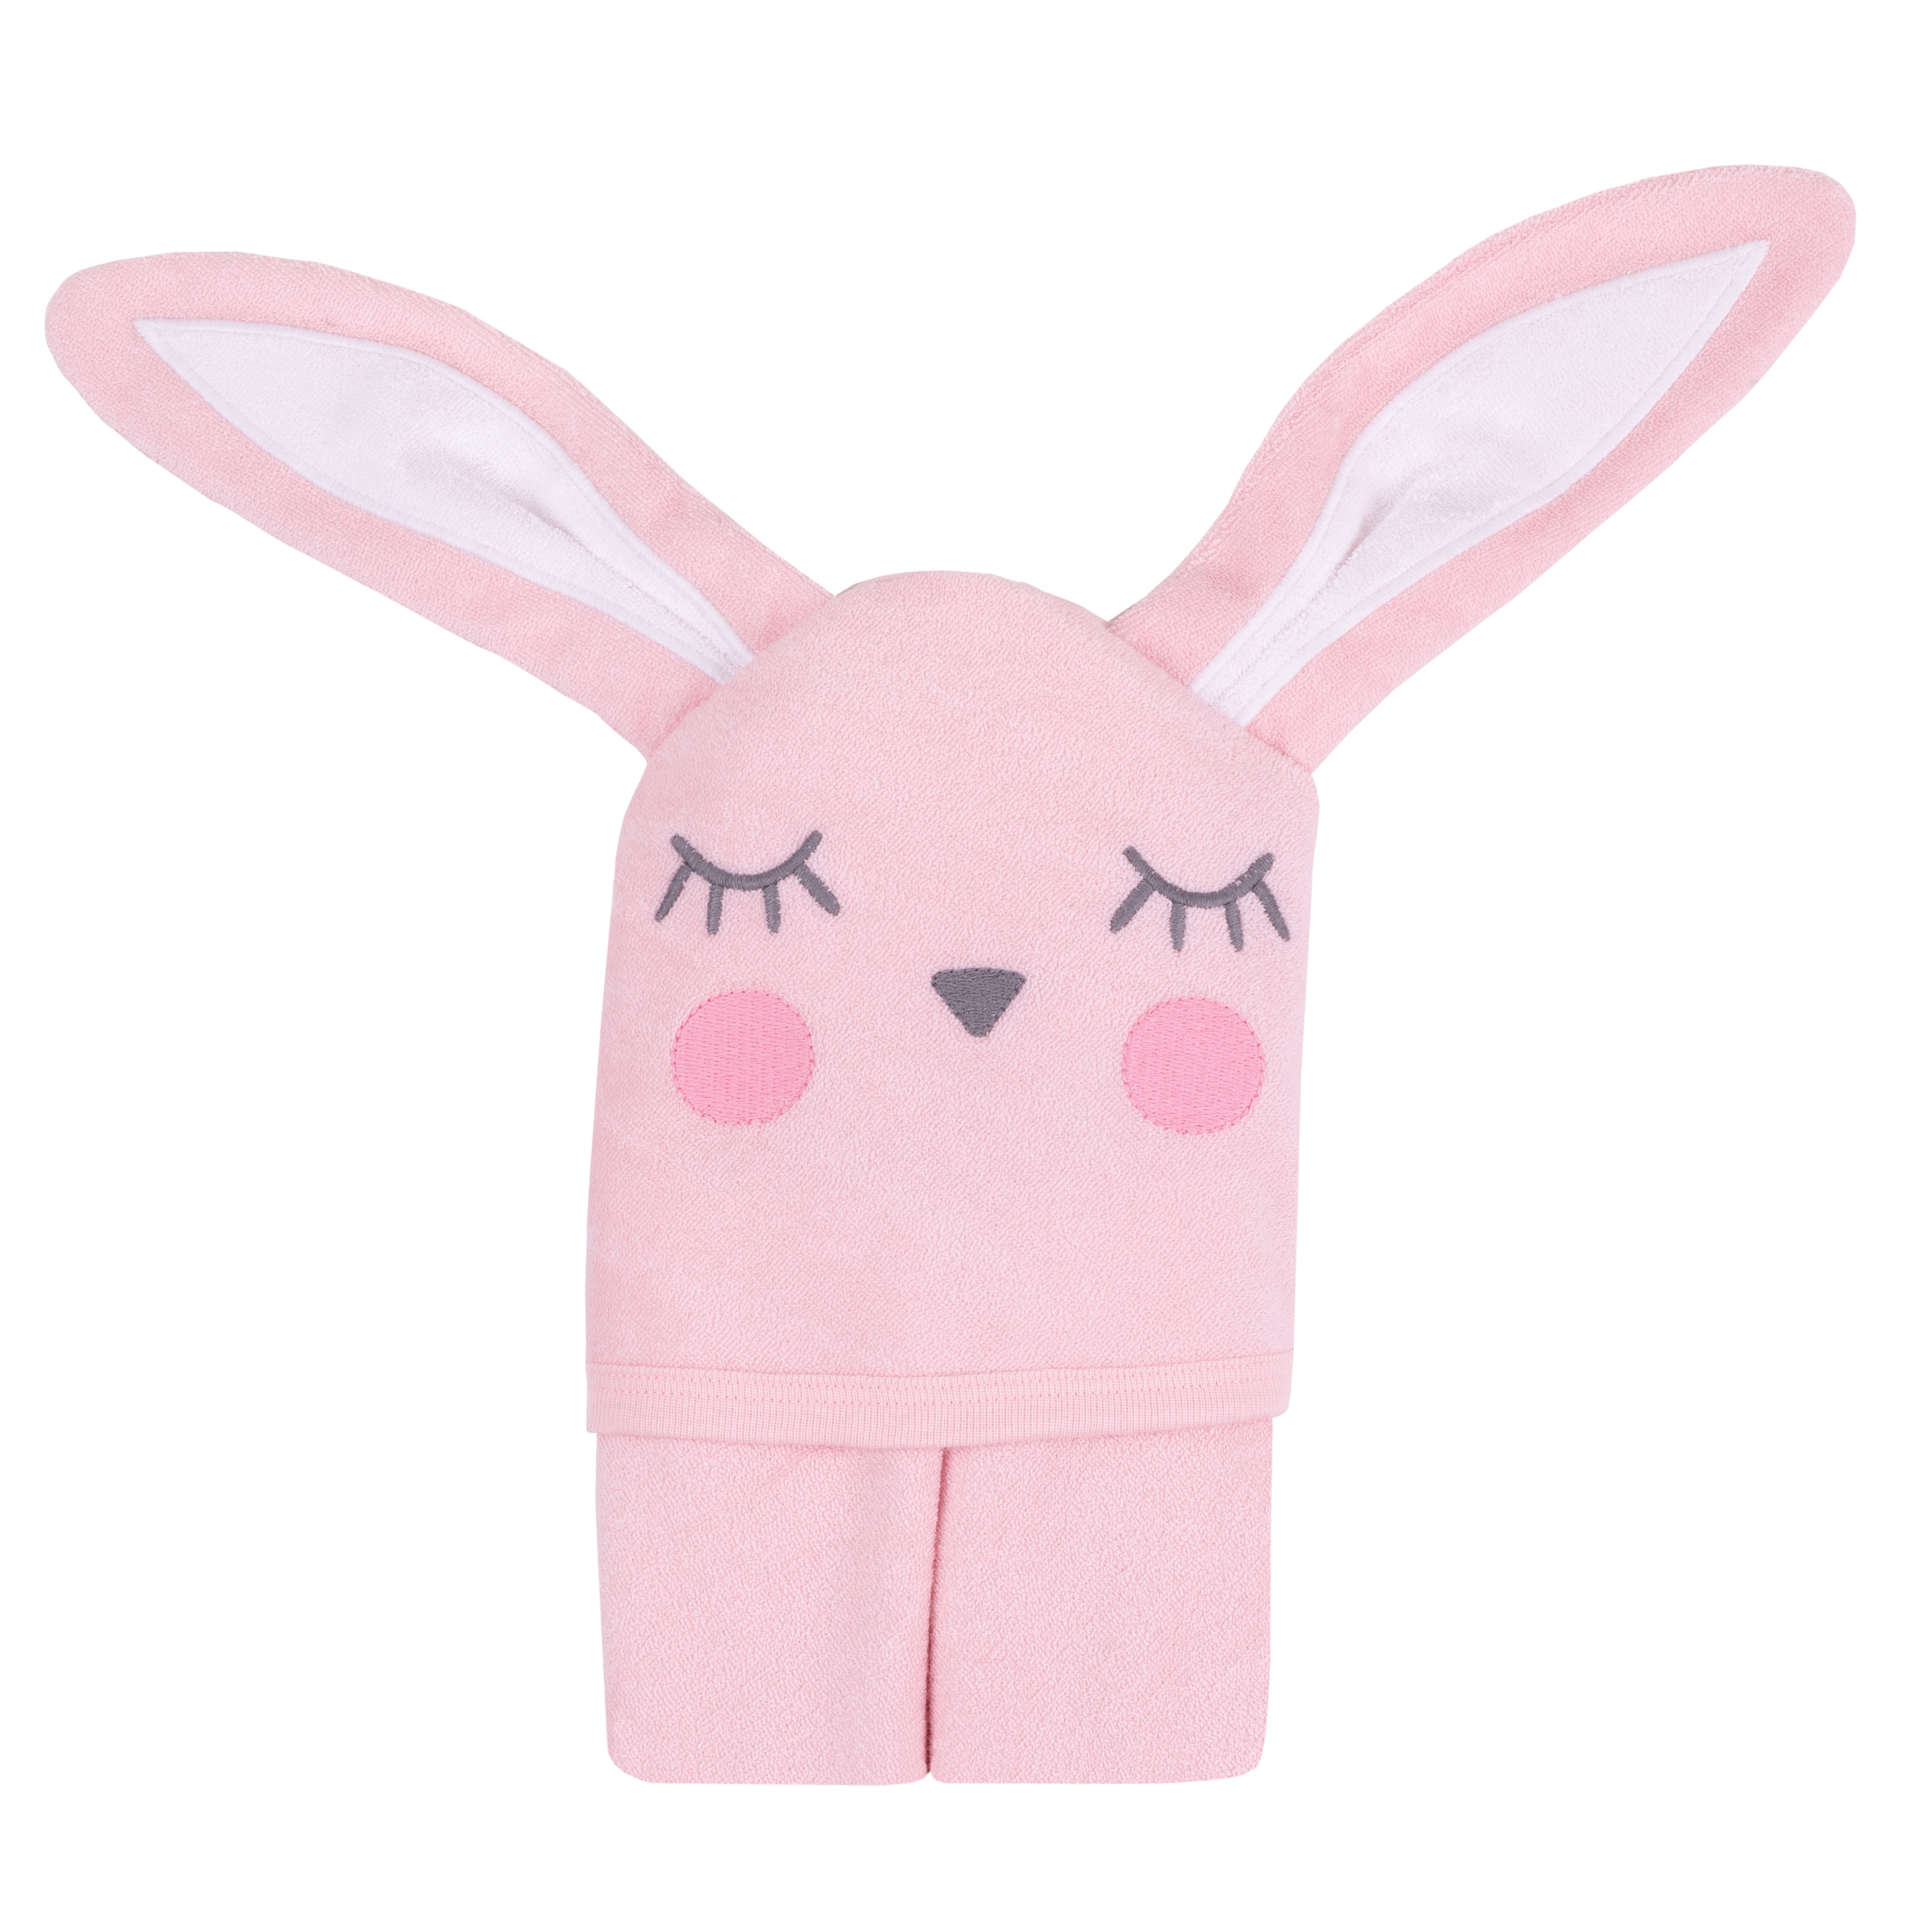 Little Star Organic Terry Cloth Hooded Bath Towel, Pink Bunny - image 1 of 5